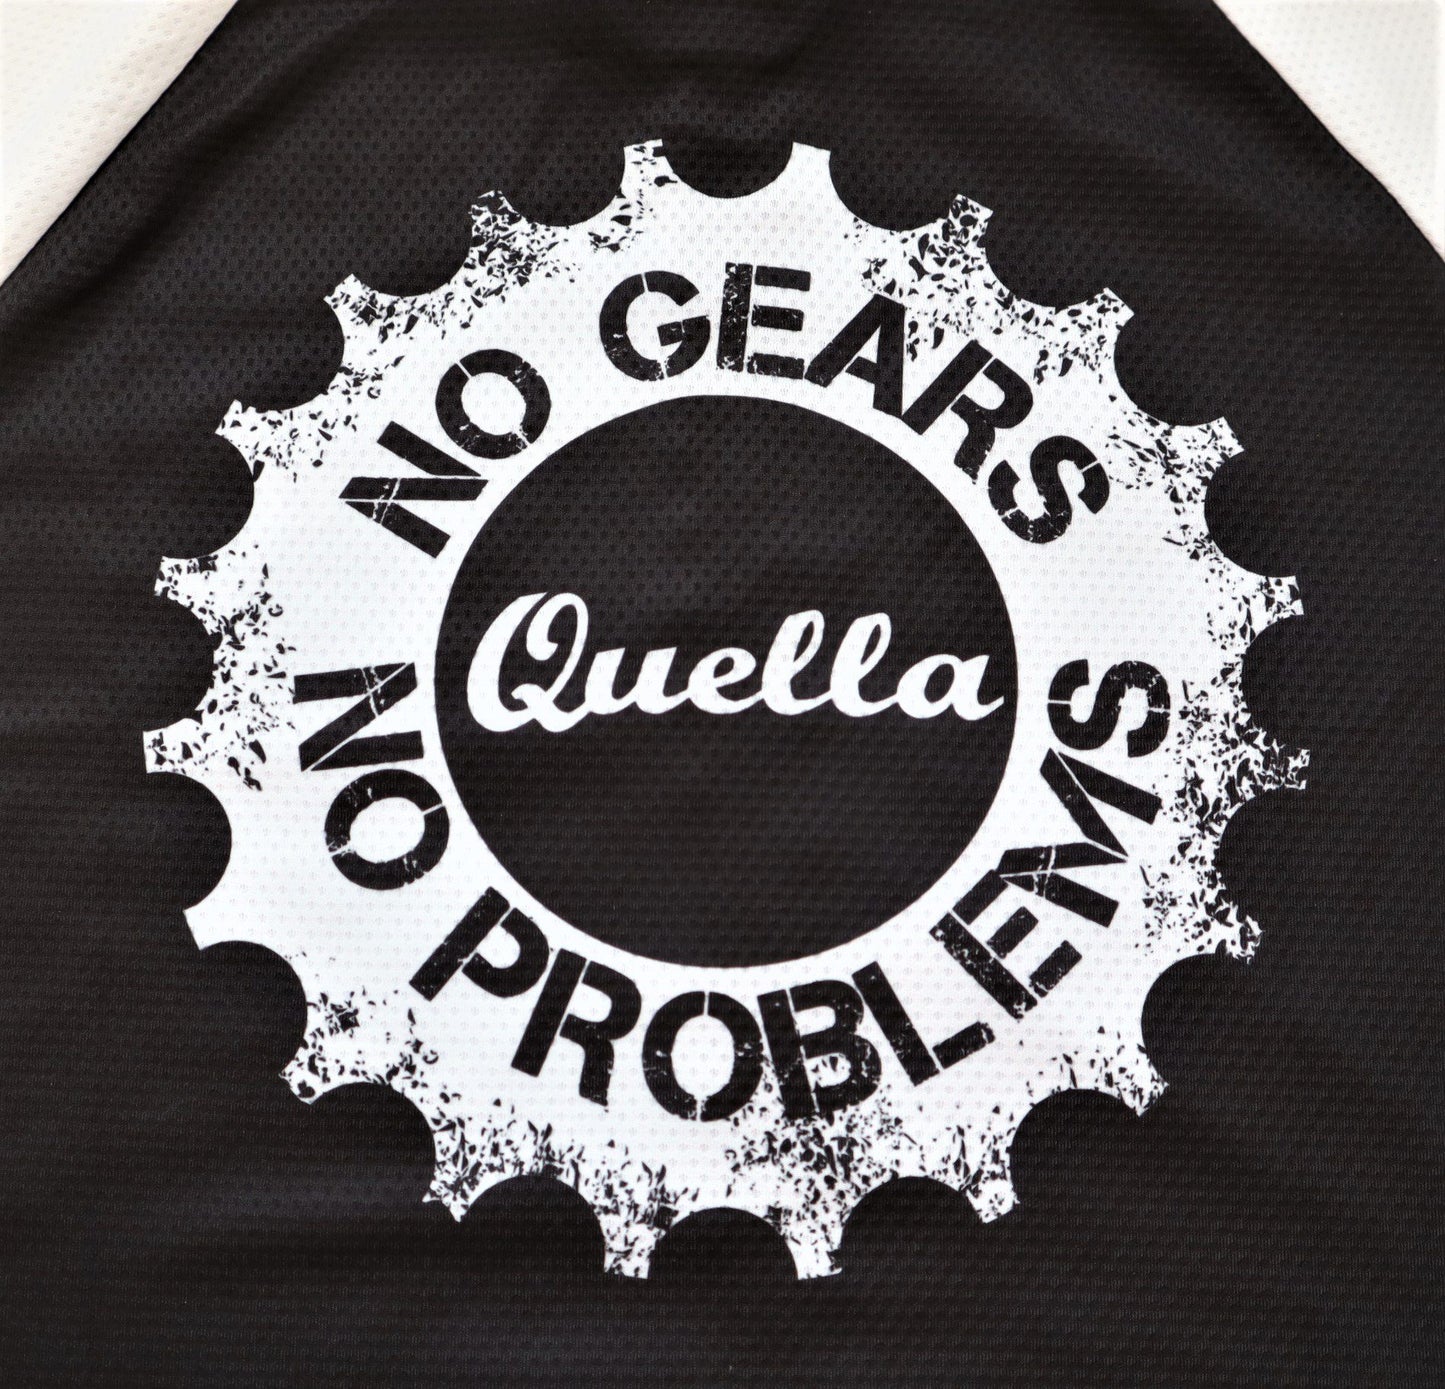 Quella 'No Gears, No Problems' Short Sleeve Cycling Jersey